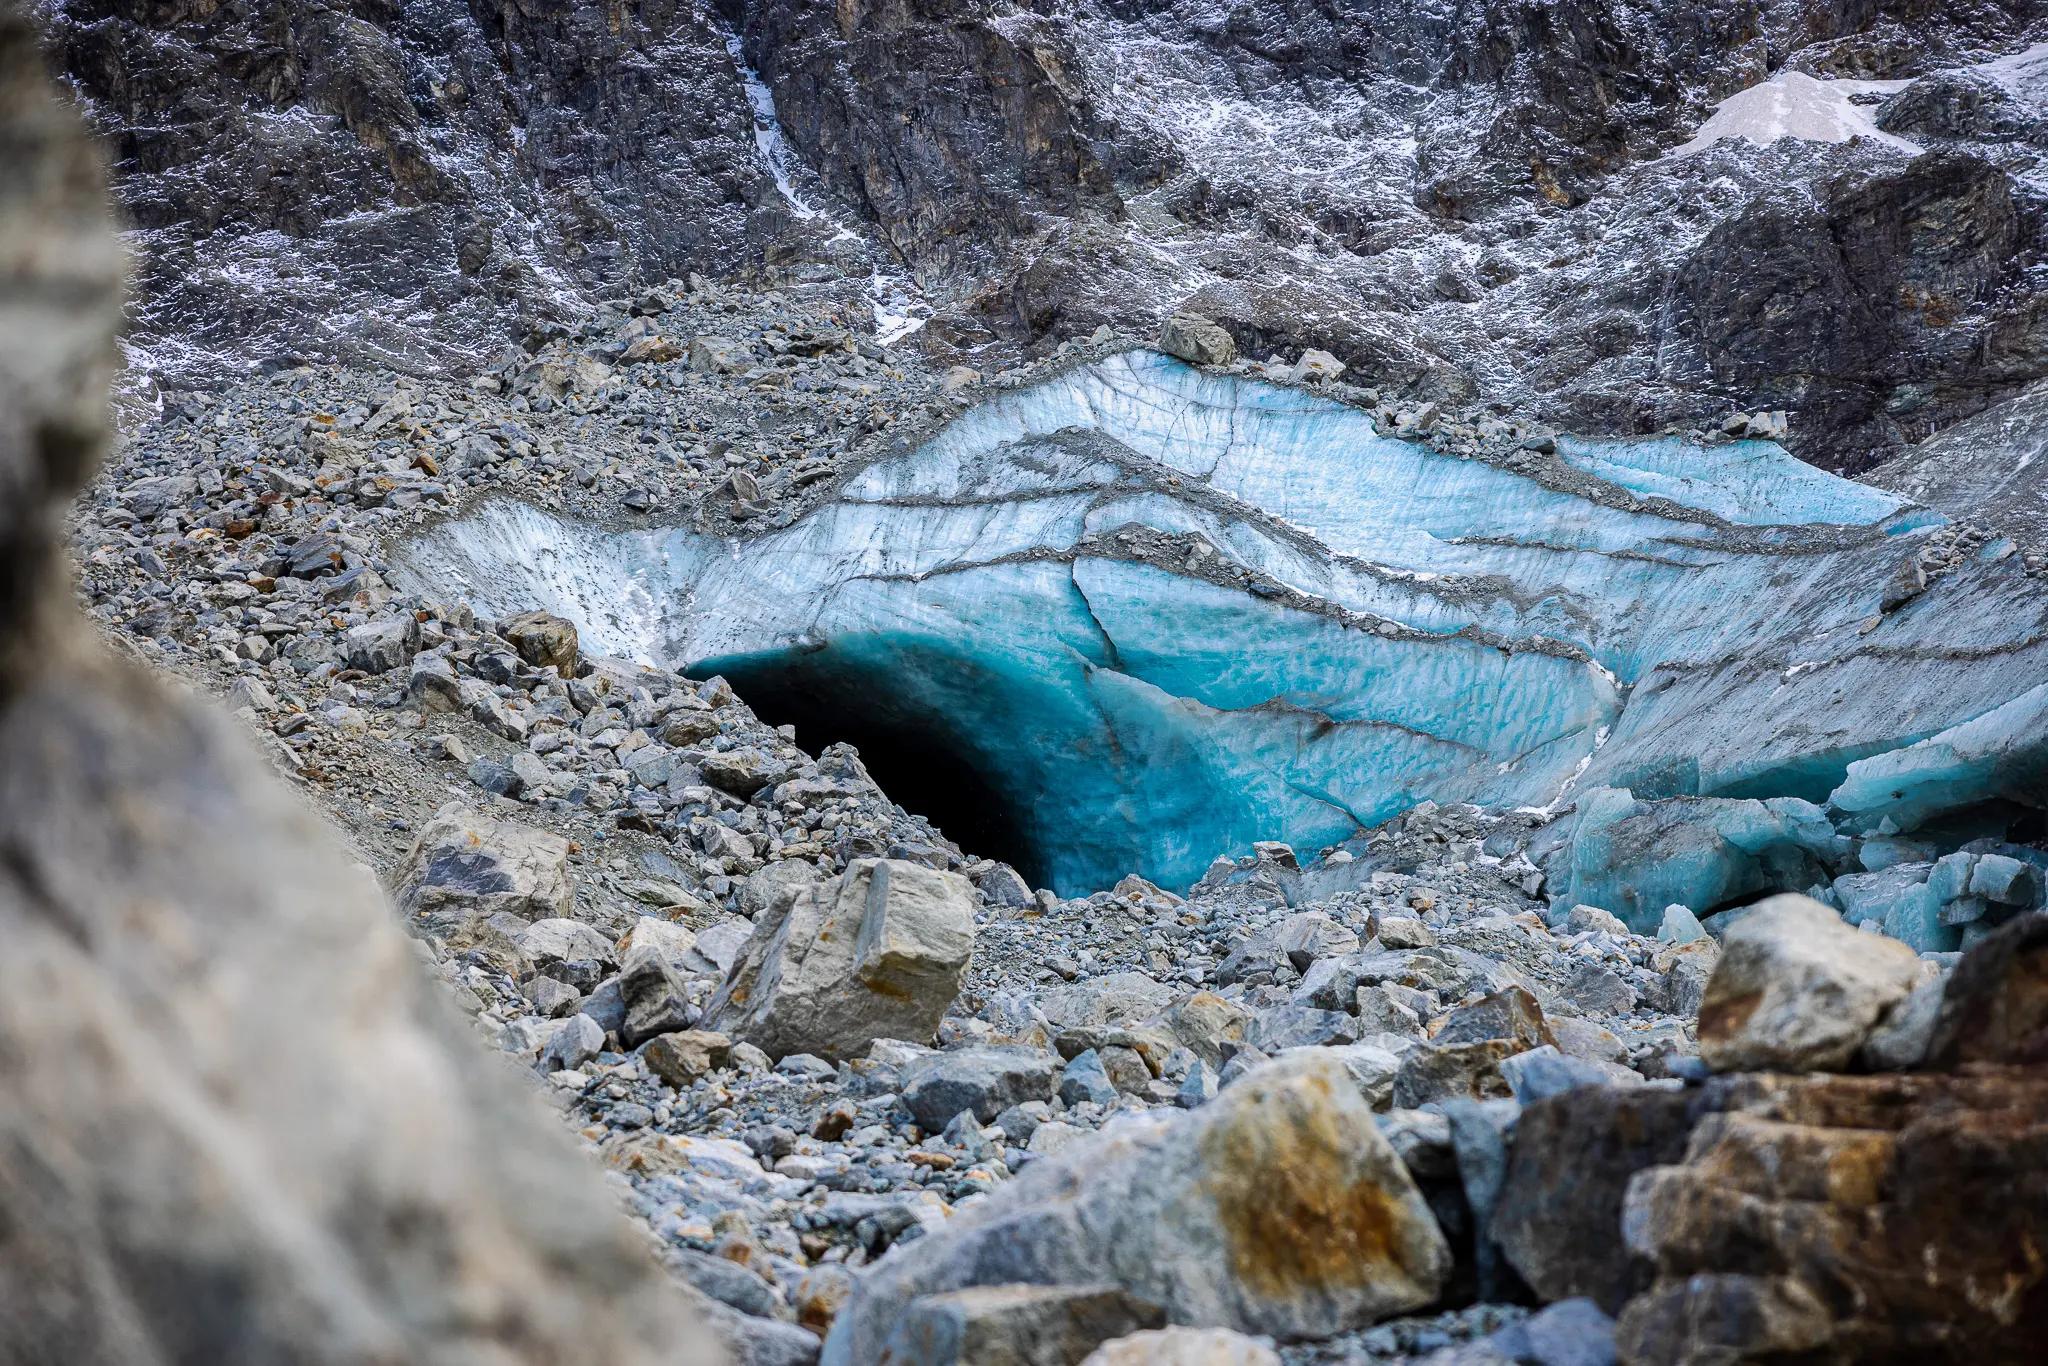 The entrance to the ice cave, the tons of stones lying around on the edge suddenly threaten to slide off